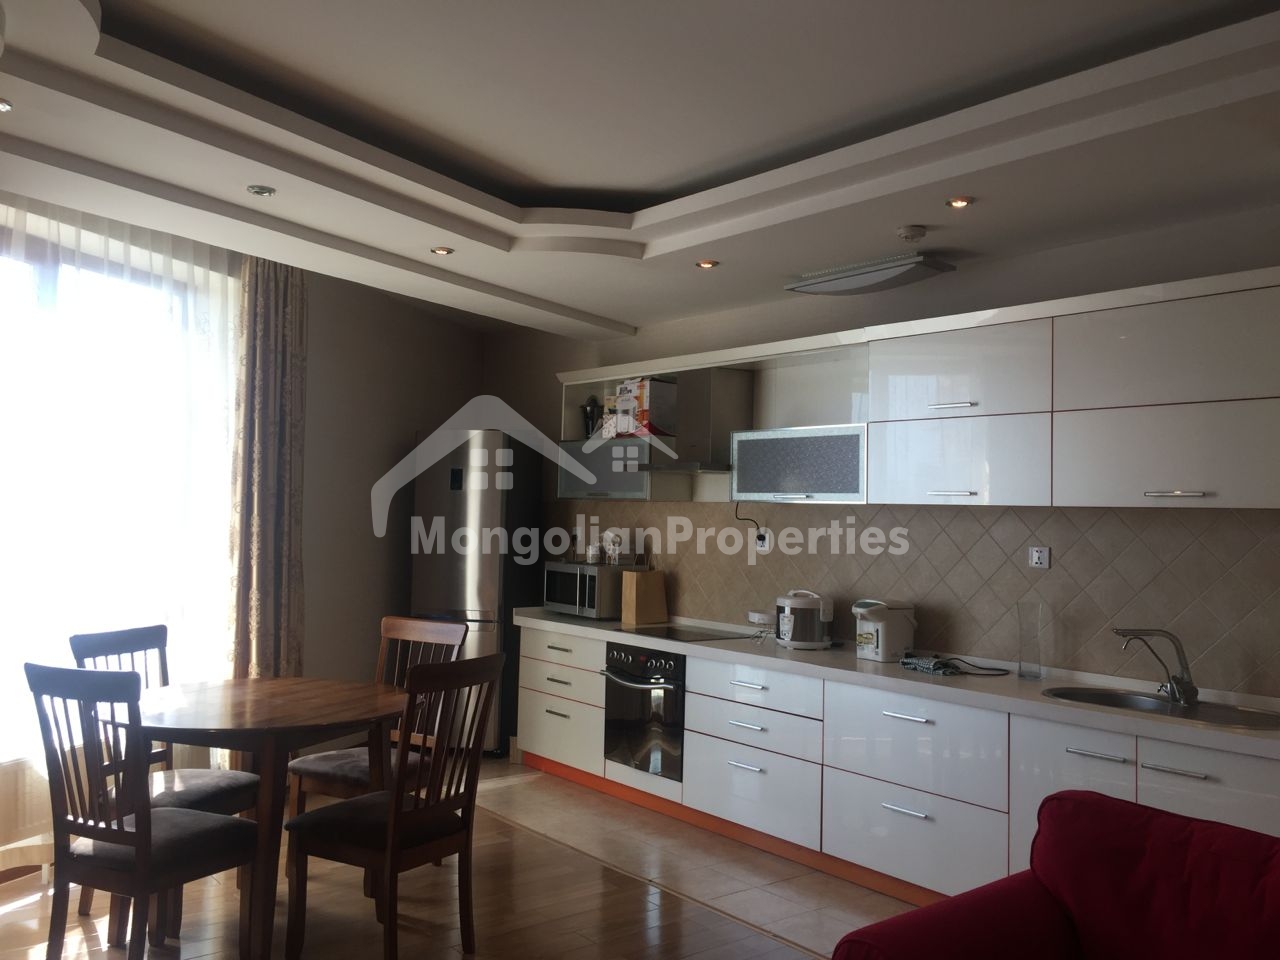 Rented 2 bedroom apartment is for sale just next to the Main Square!